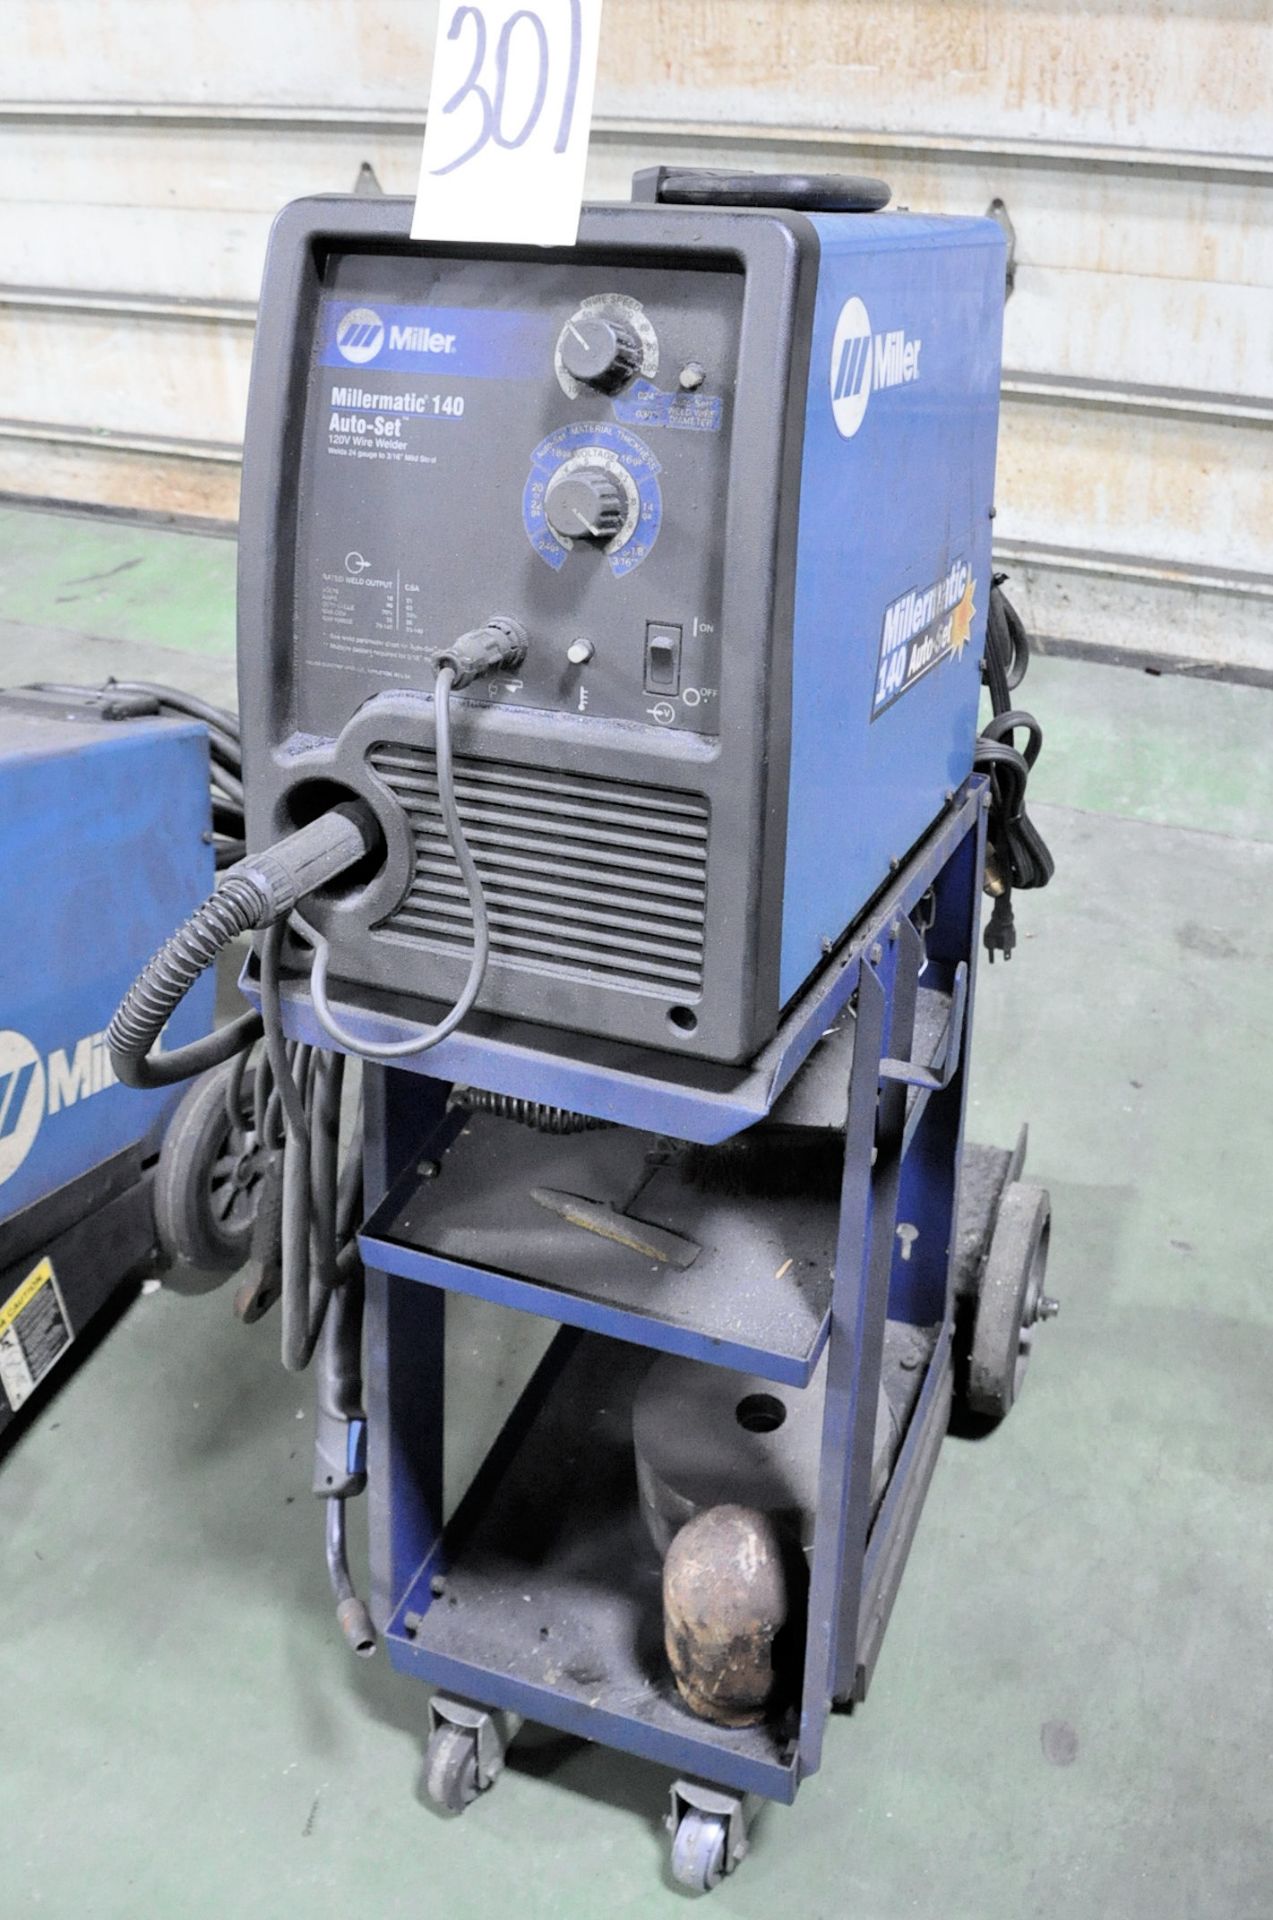 Miller Millermatic 140 Auto-Set, 90-Amps Capacity Wire Feed Mig Welder, S/n MD15282BN, with Leads